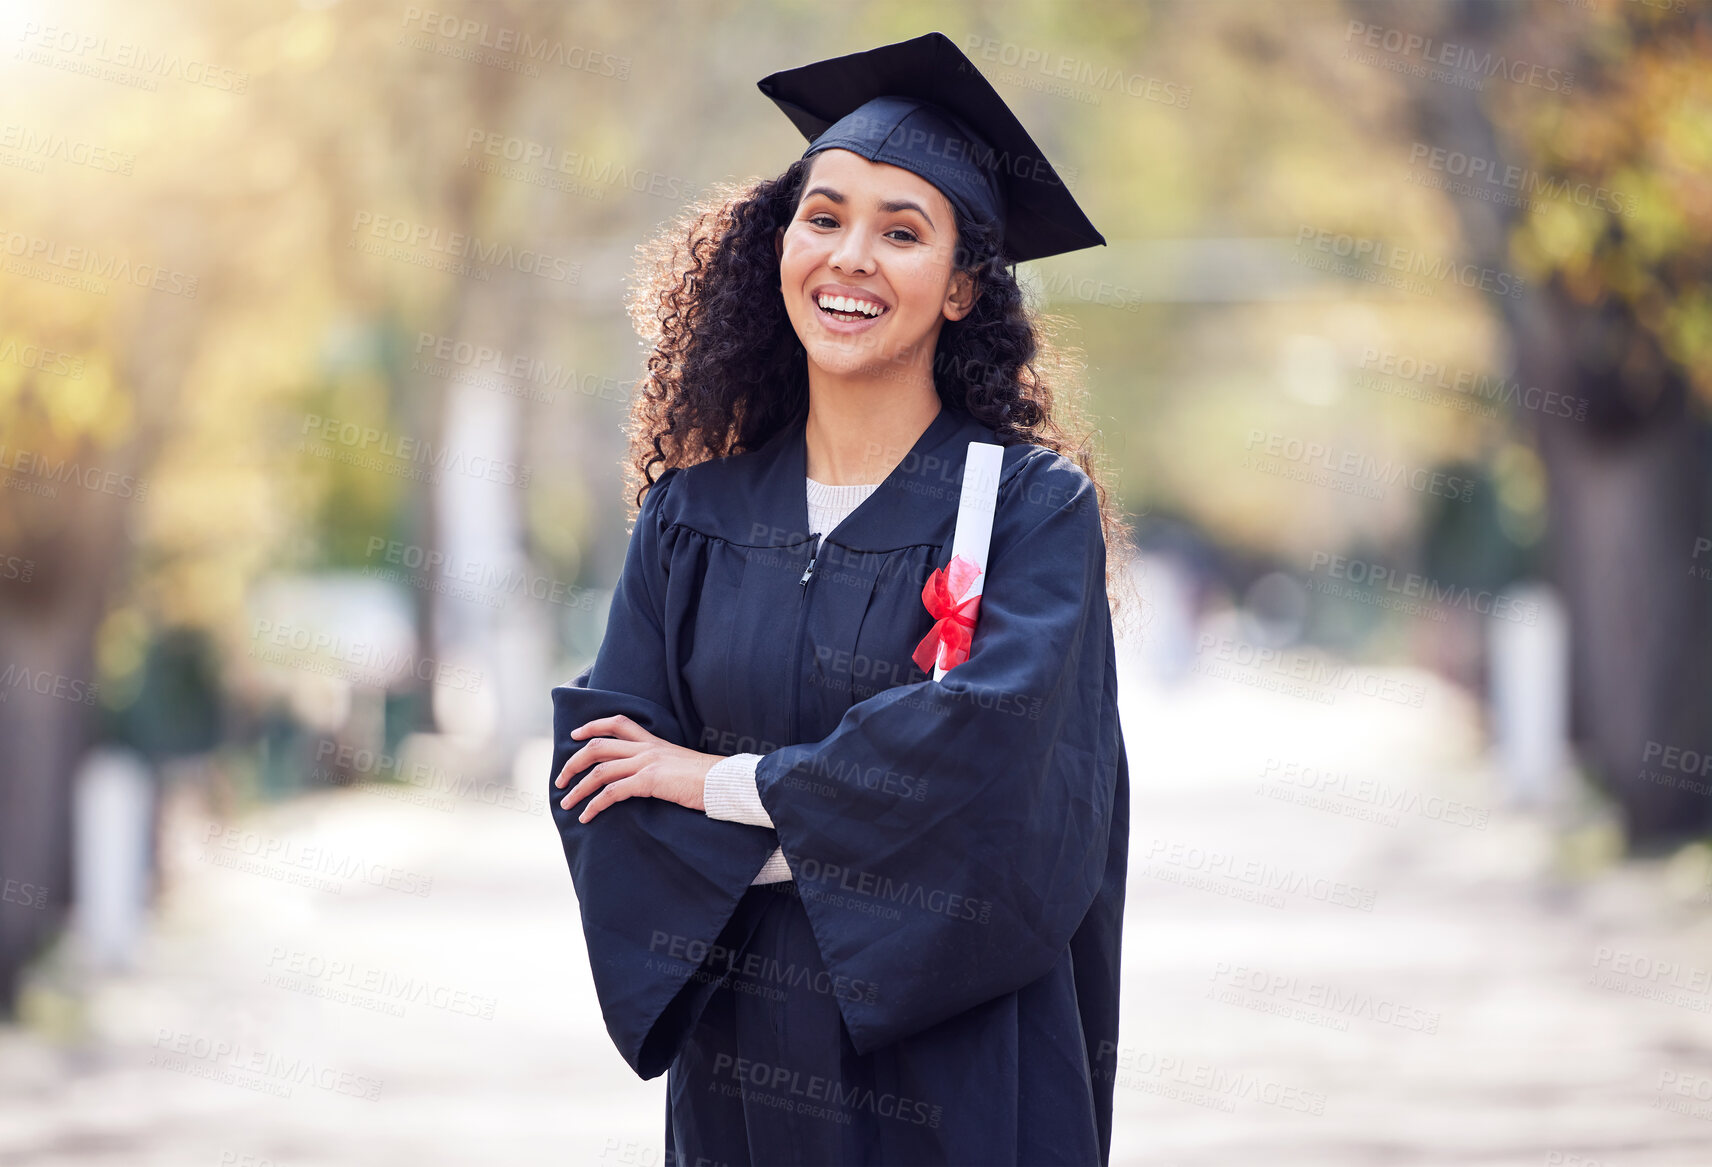 Buy stock photo Shot of a young woman celebrating graduation day